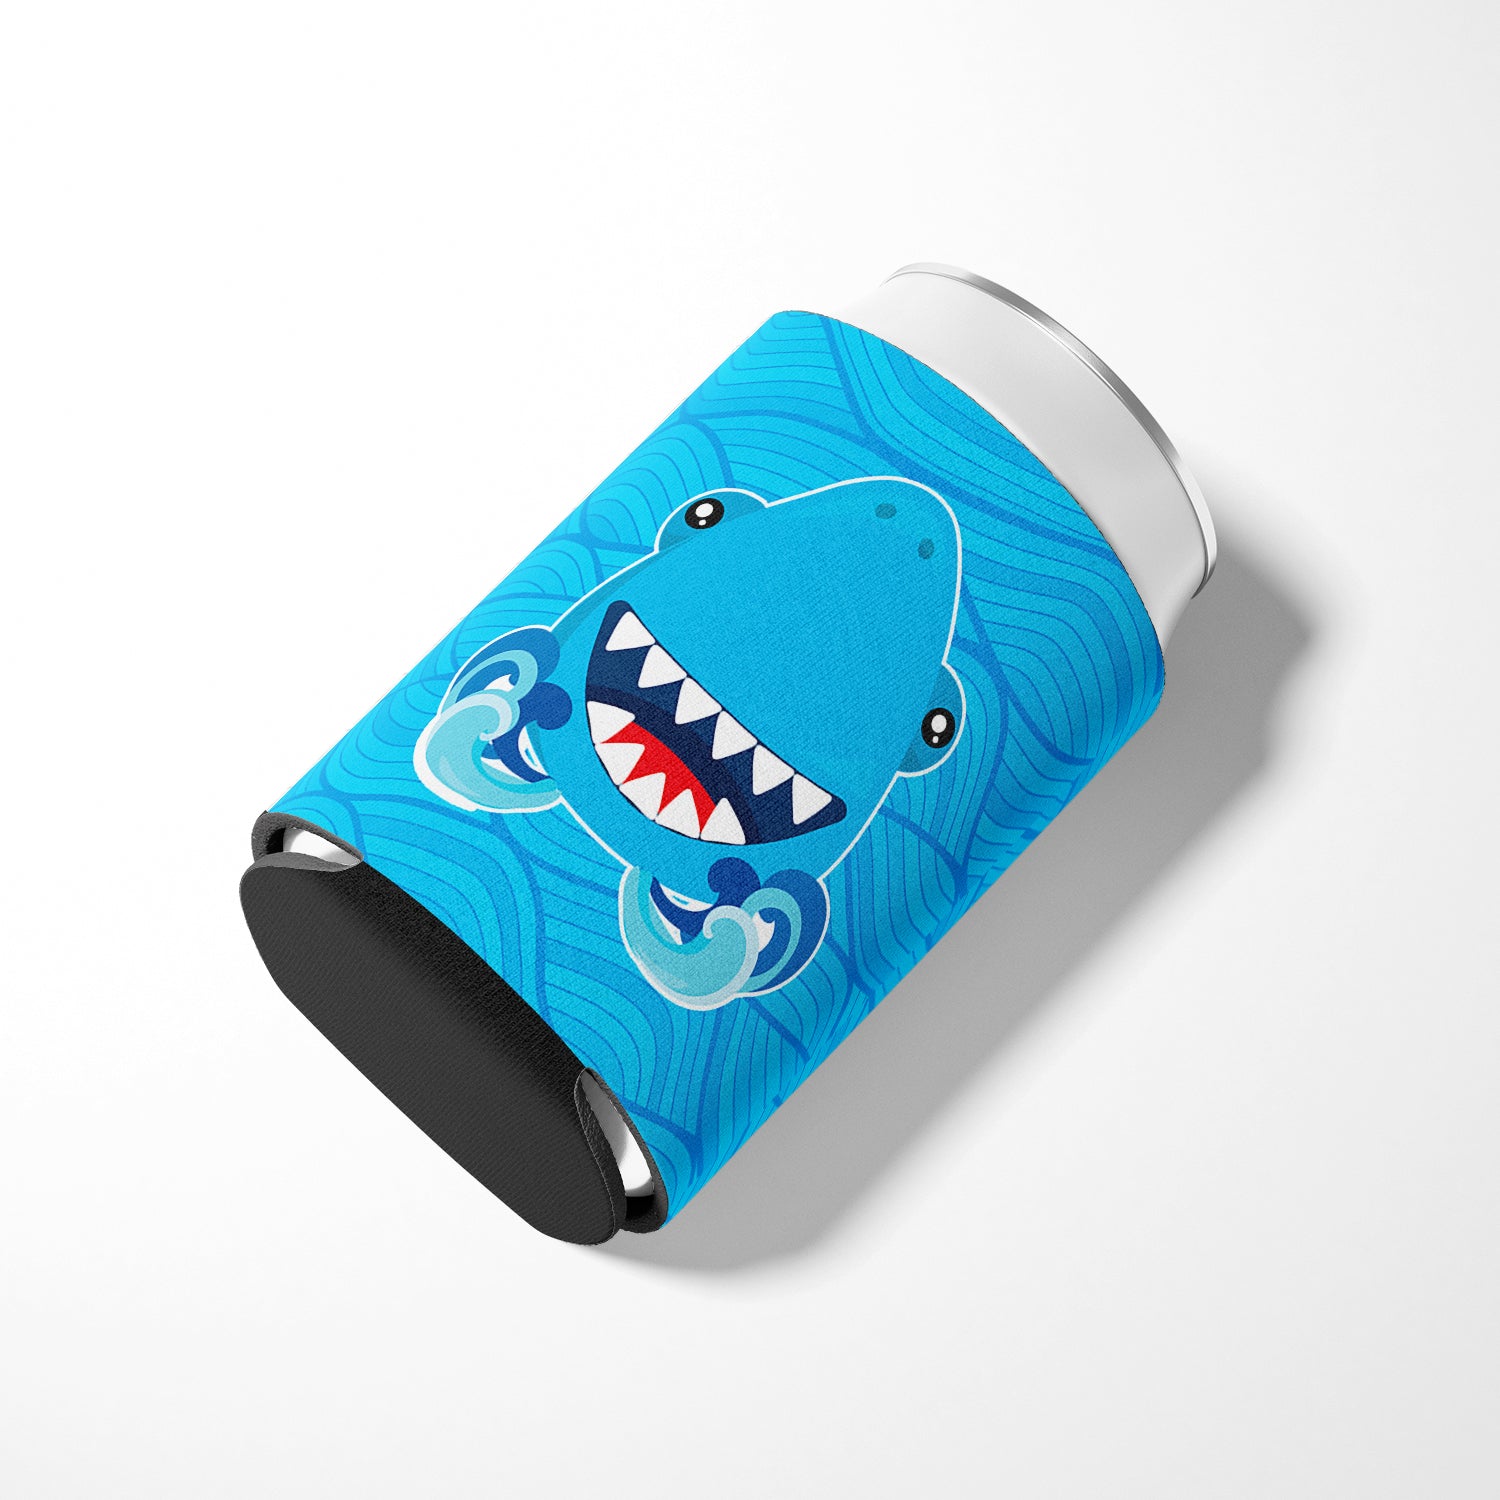 Shark Open Wide in Waves Can or Bottle Hugger BB6947CC